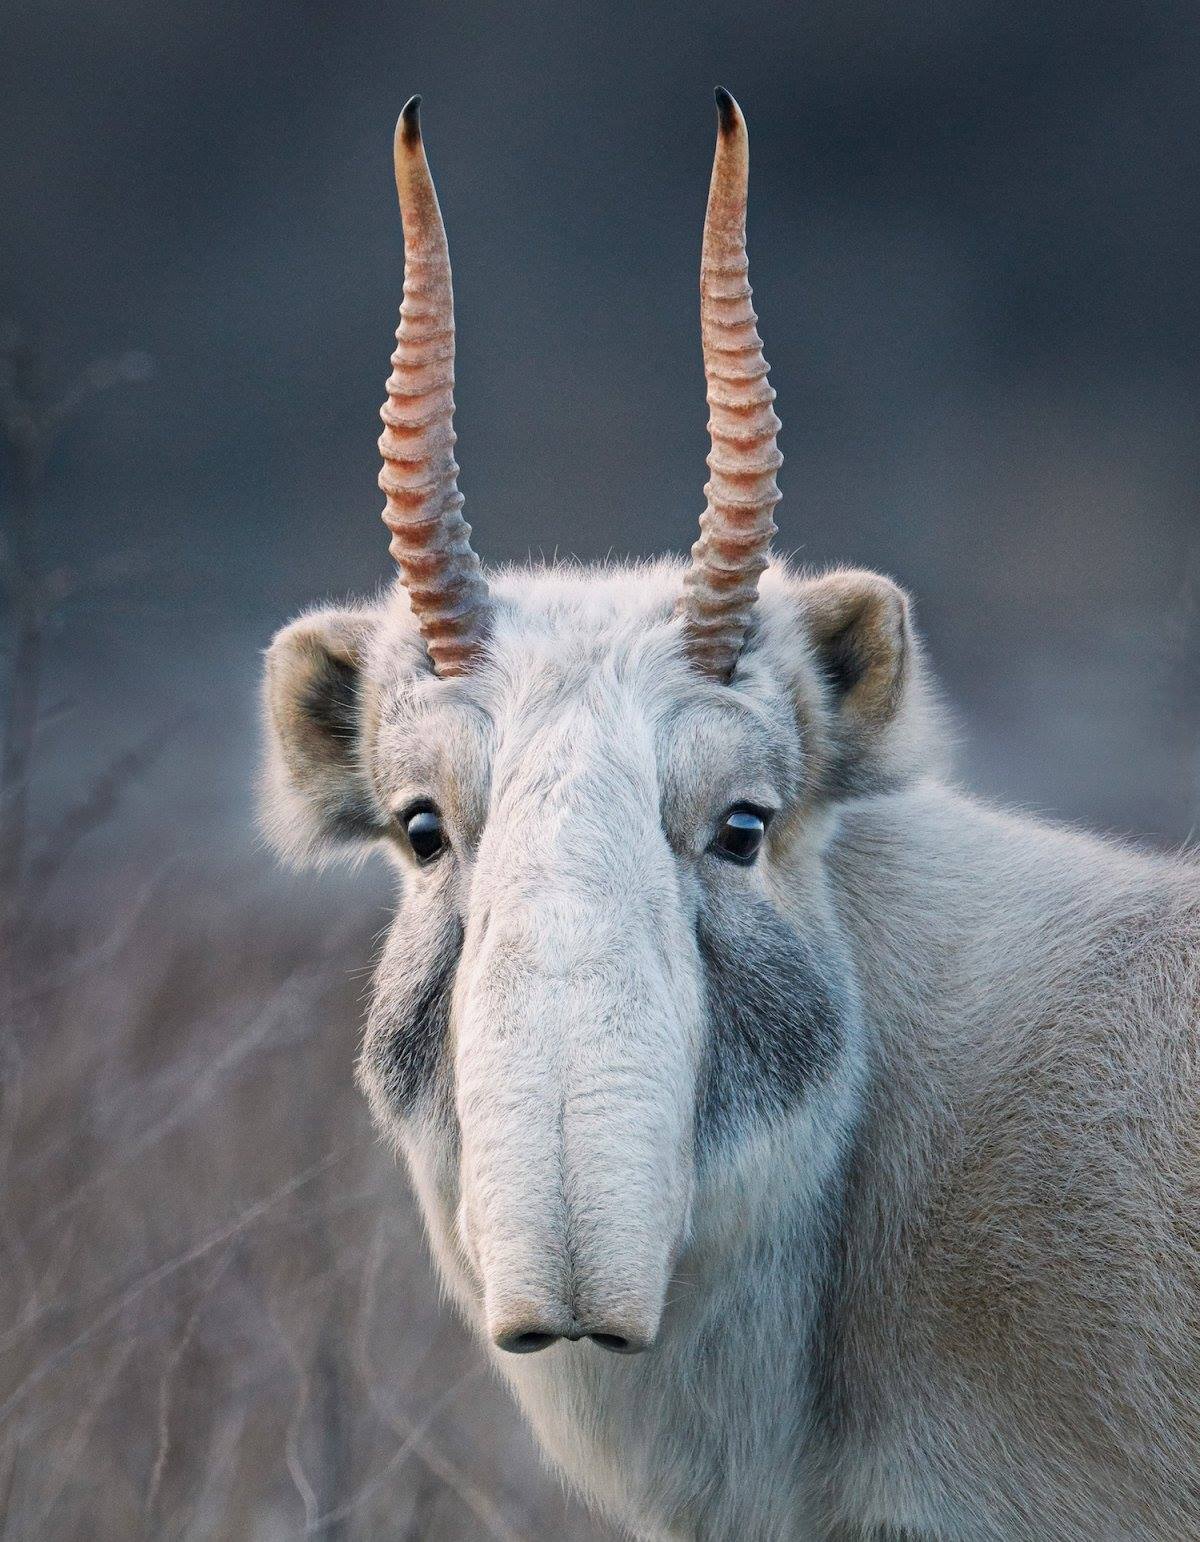 myfrogcroaked:
“ Here is the best animal face you will see today!
This is a Saiga antelope (Saiga tatarica), a species listed in CITES Appendix II and evaluated as critically endangered by the IUCN Red List. It lives in Asia (Kazakhstan, Mongolia,...